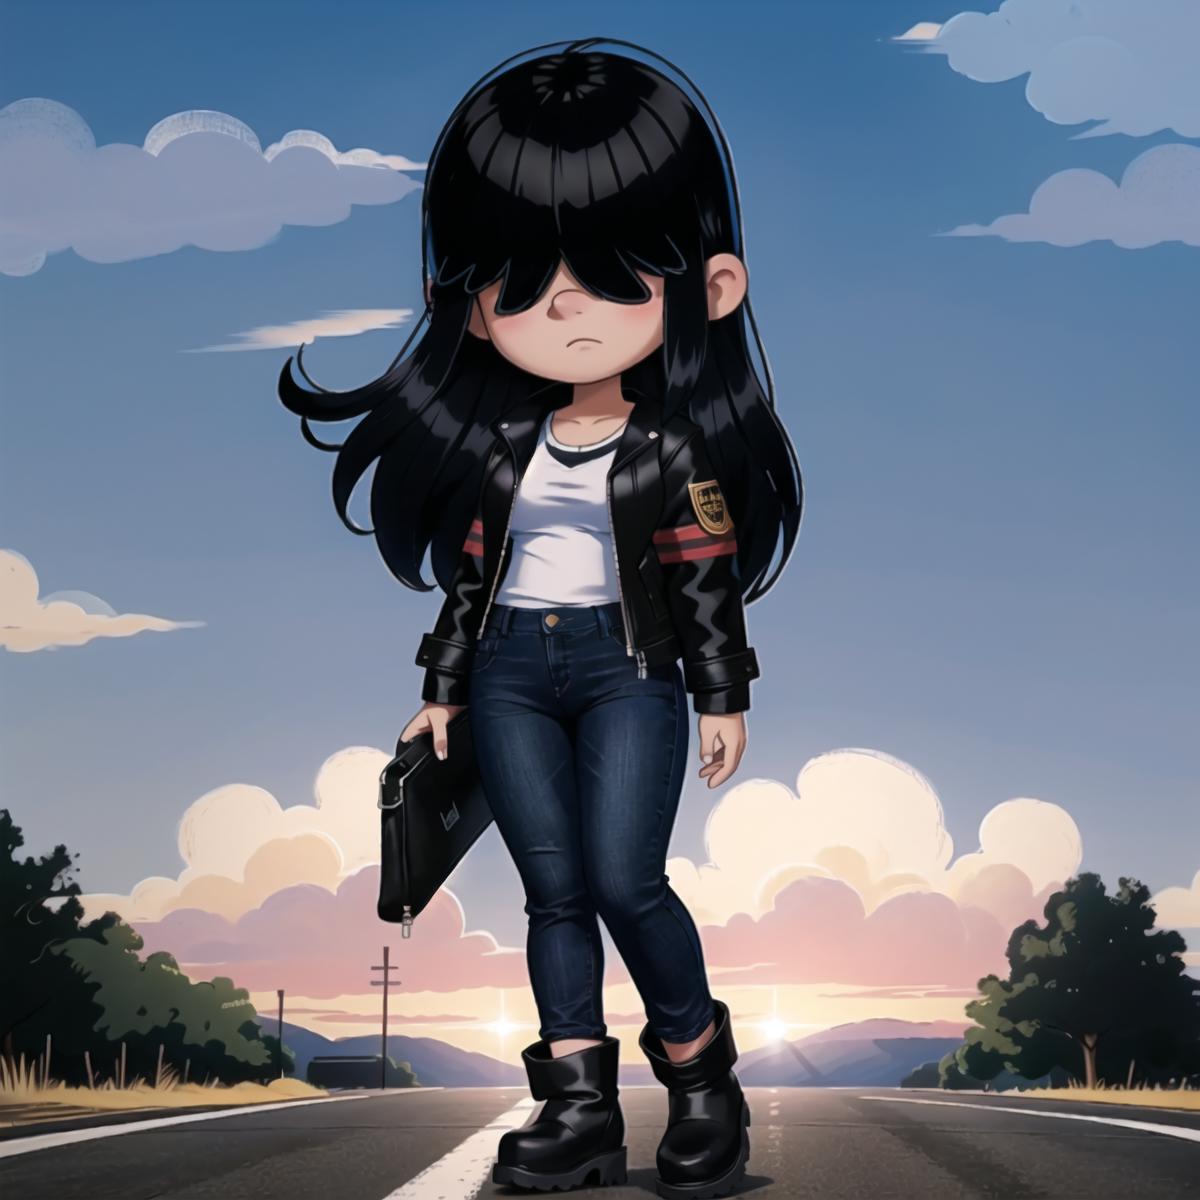 Lucy loud [loud house] image by Scorched_Cube